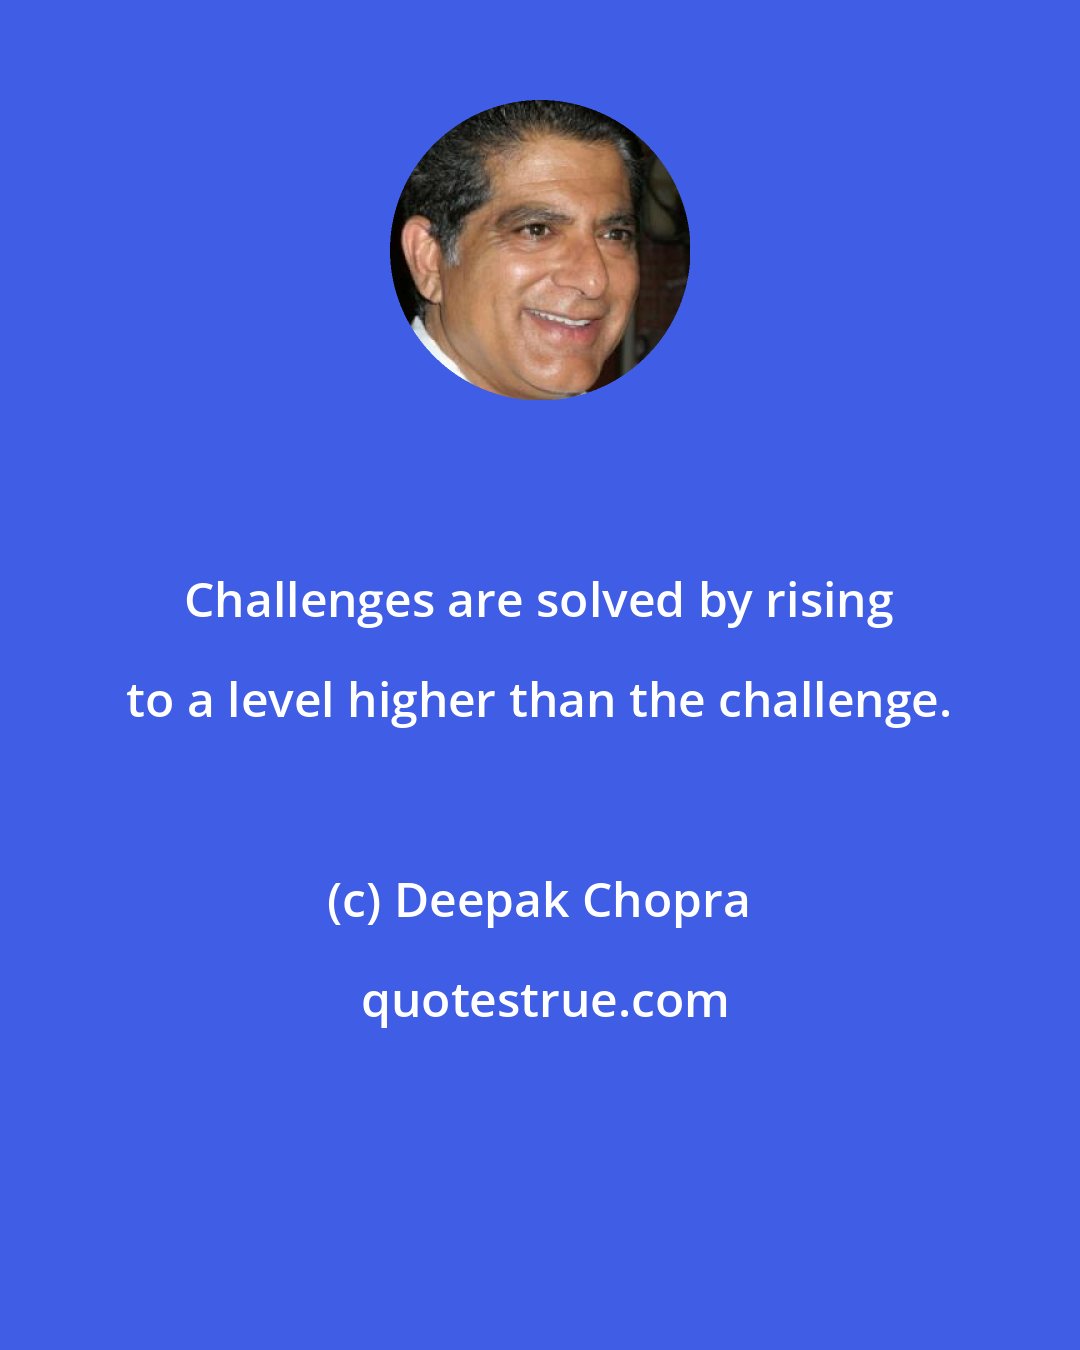 Deepak Chopra: Challenges are solved by rising to a level higher than the challenge.